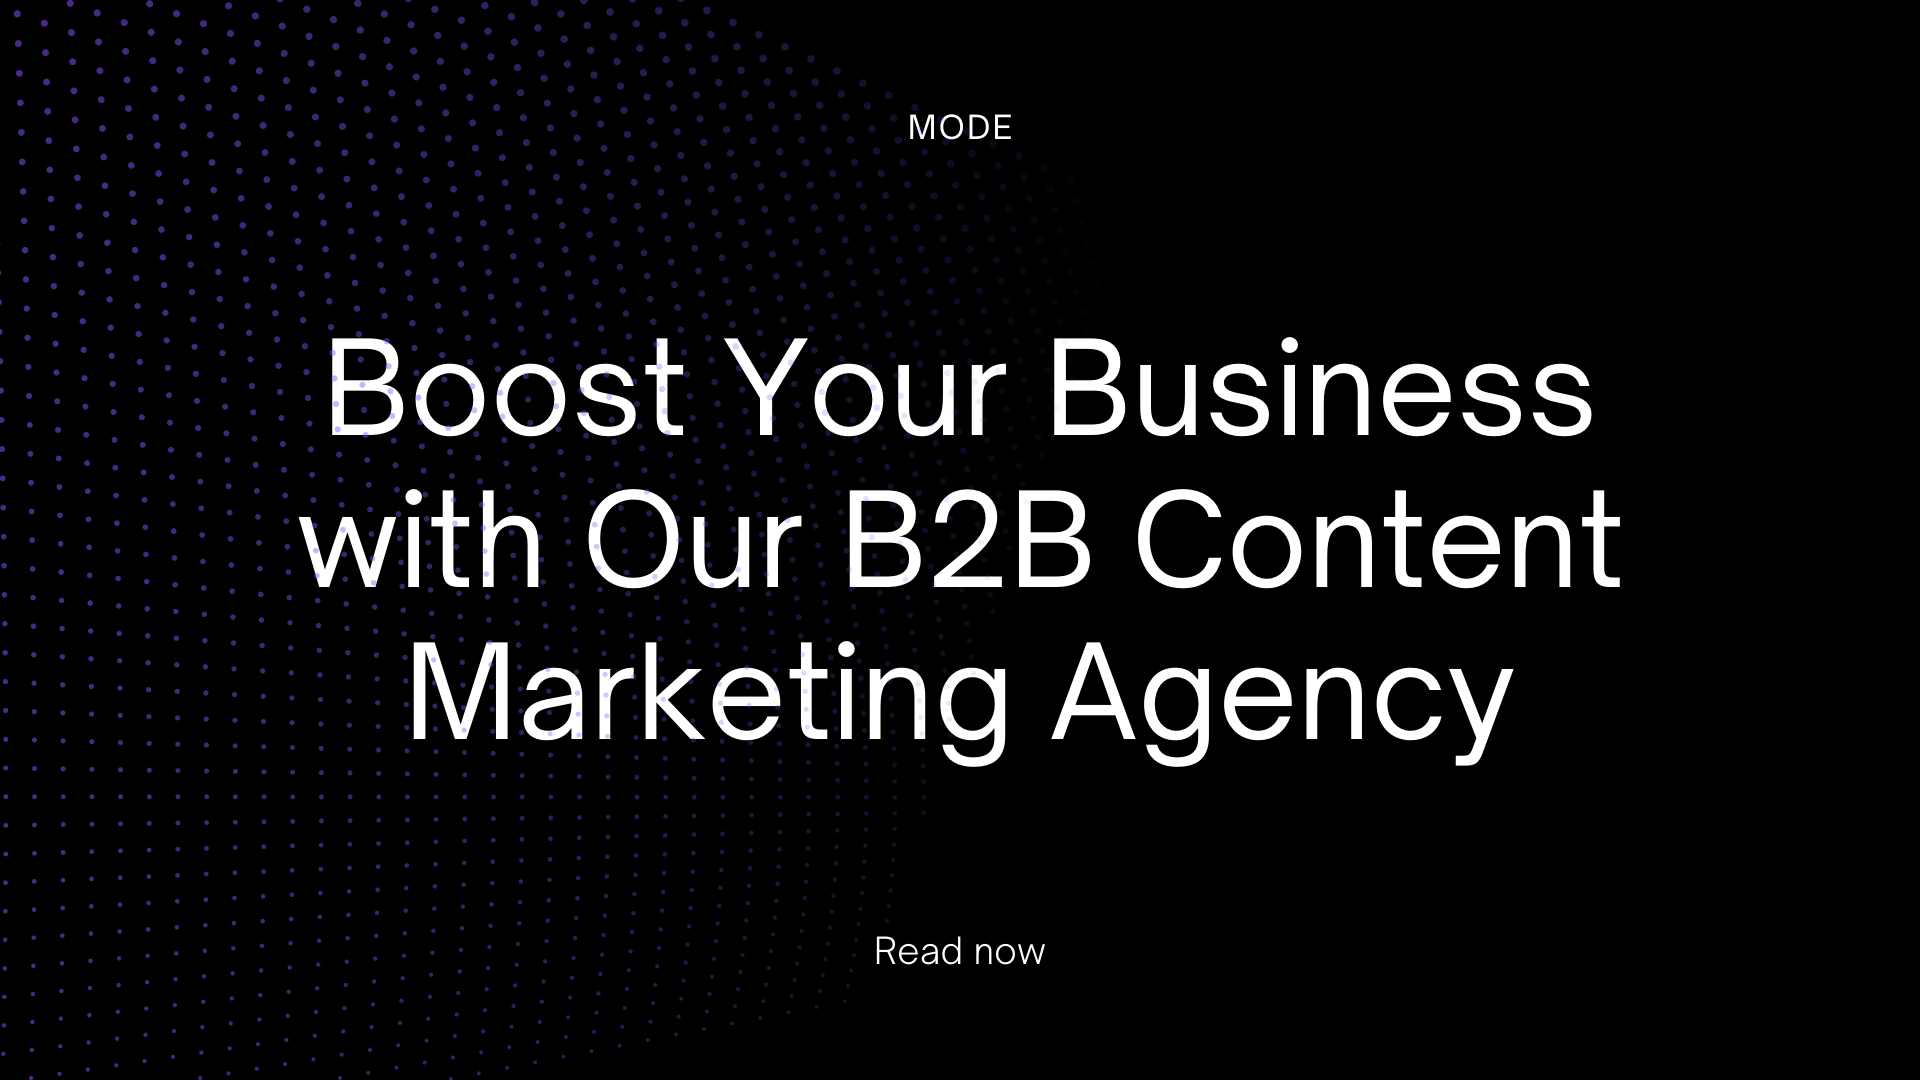 Boost Your Business with Our B2B Content Marketing Agency